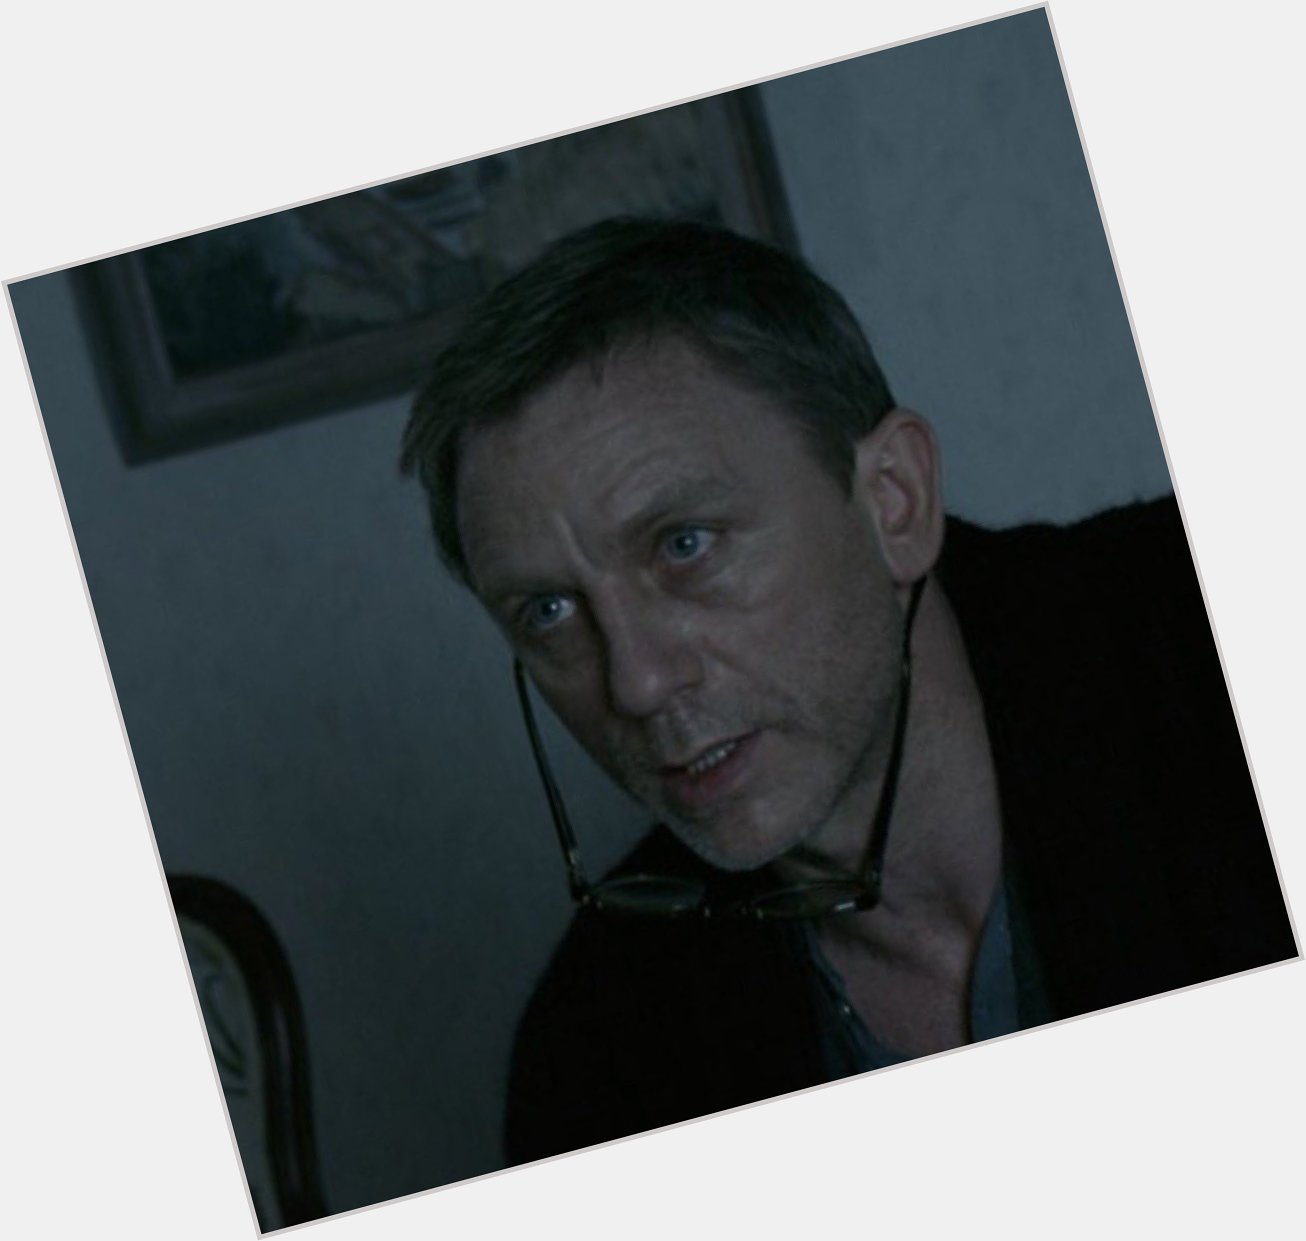 Happy birthday to Daniel Craig whose glasses in The Girl With the Dragon Tattoo will always perplex me 